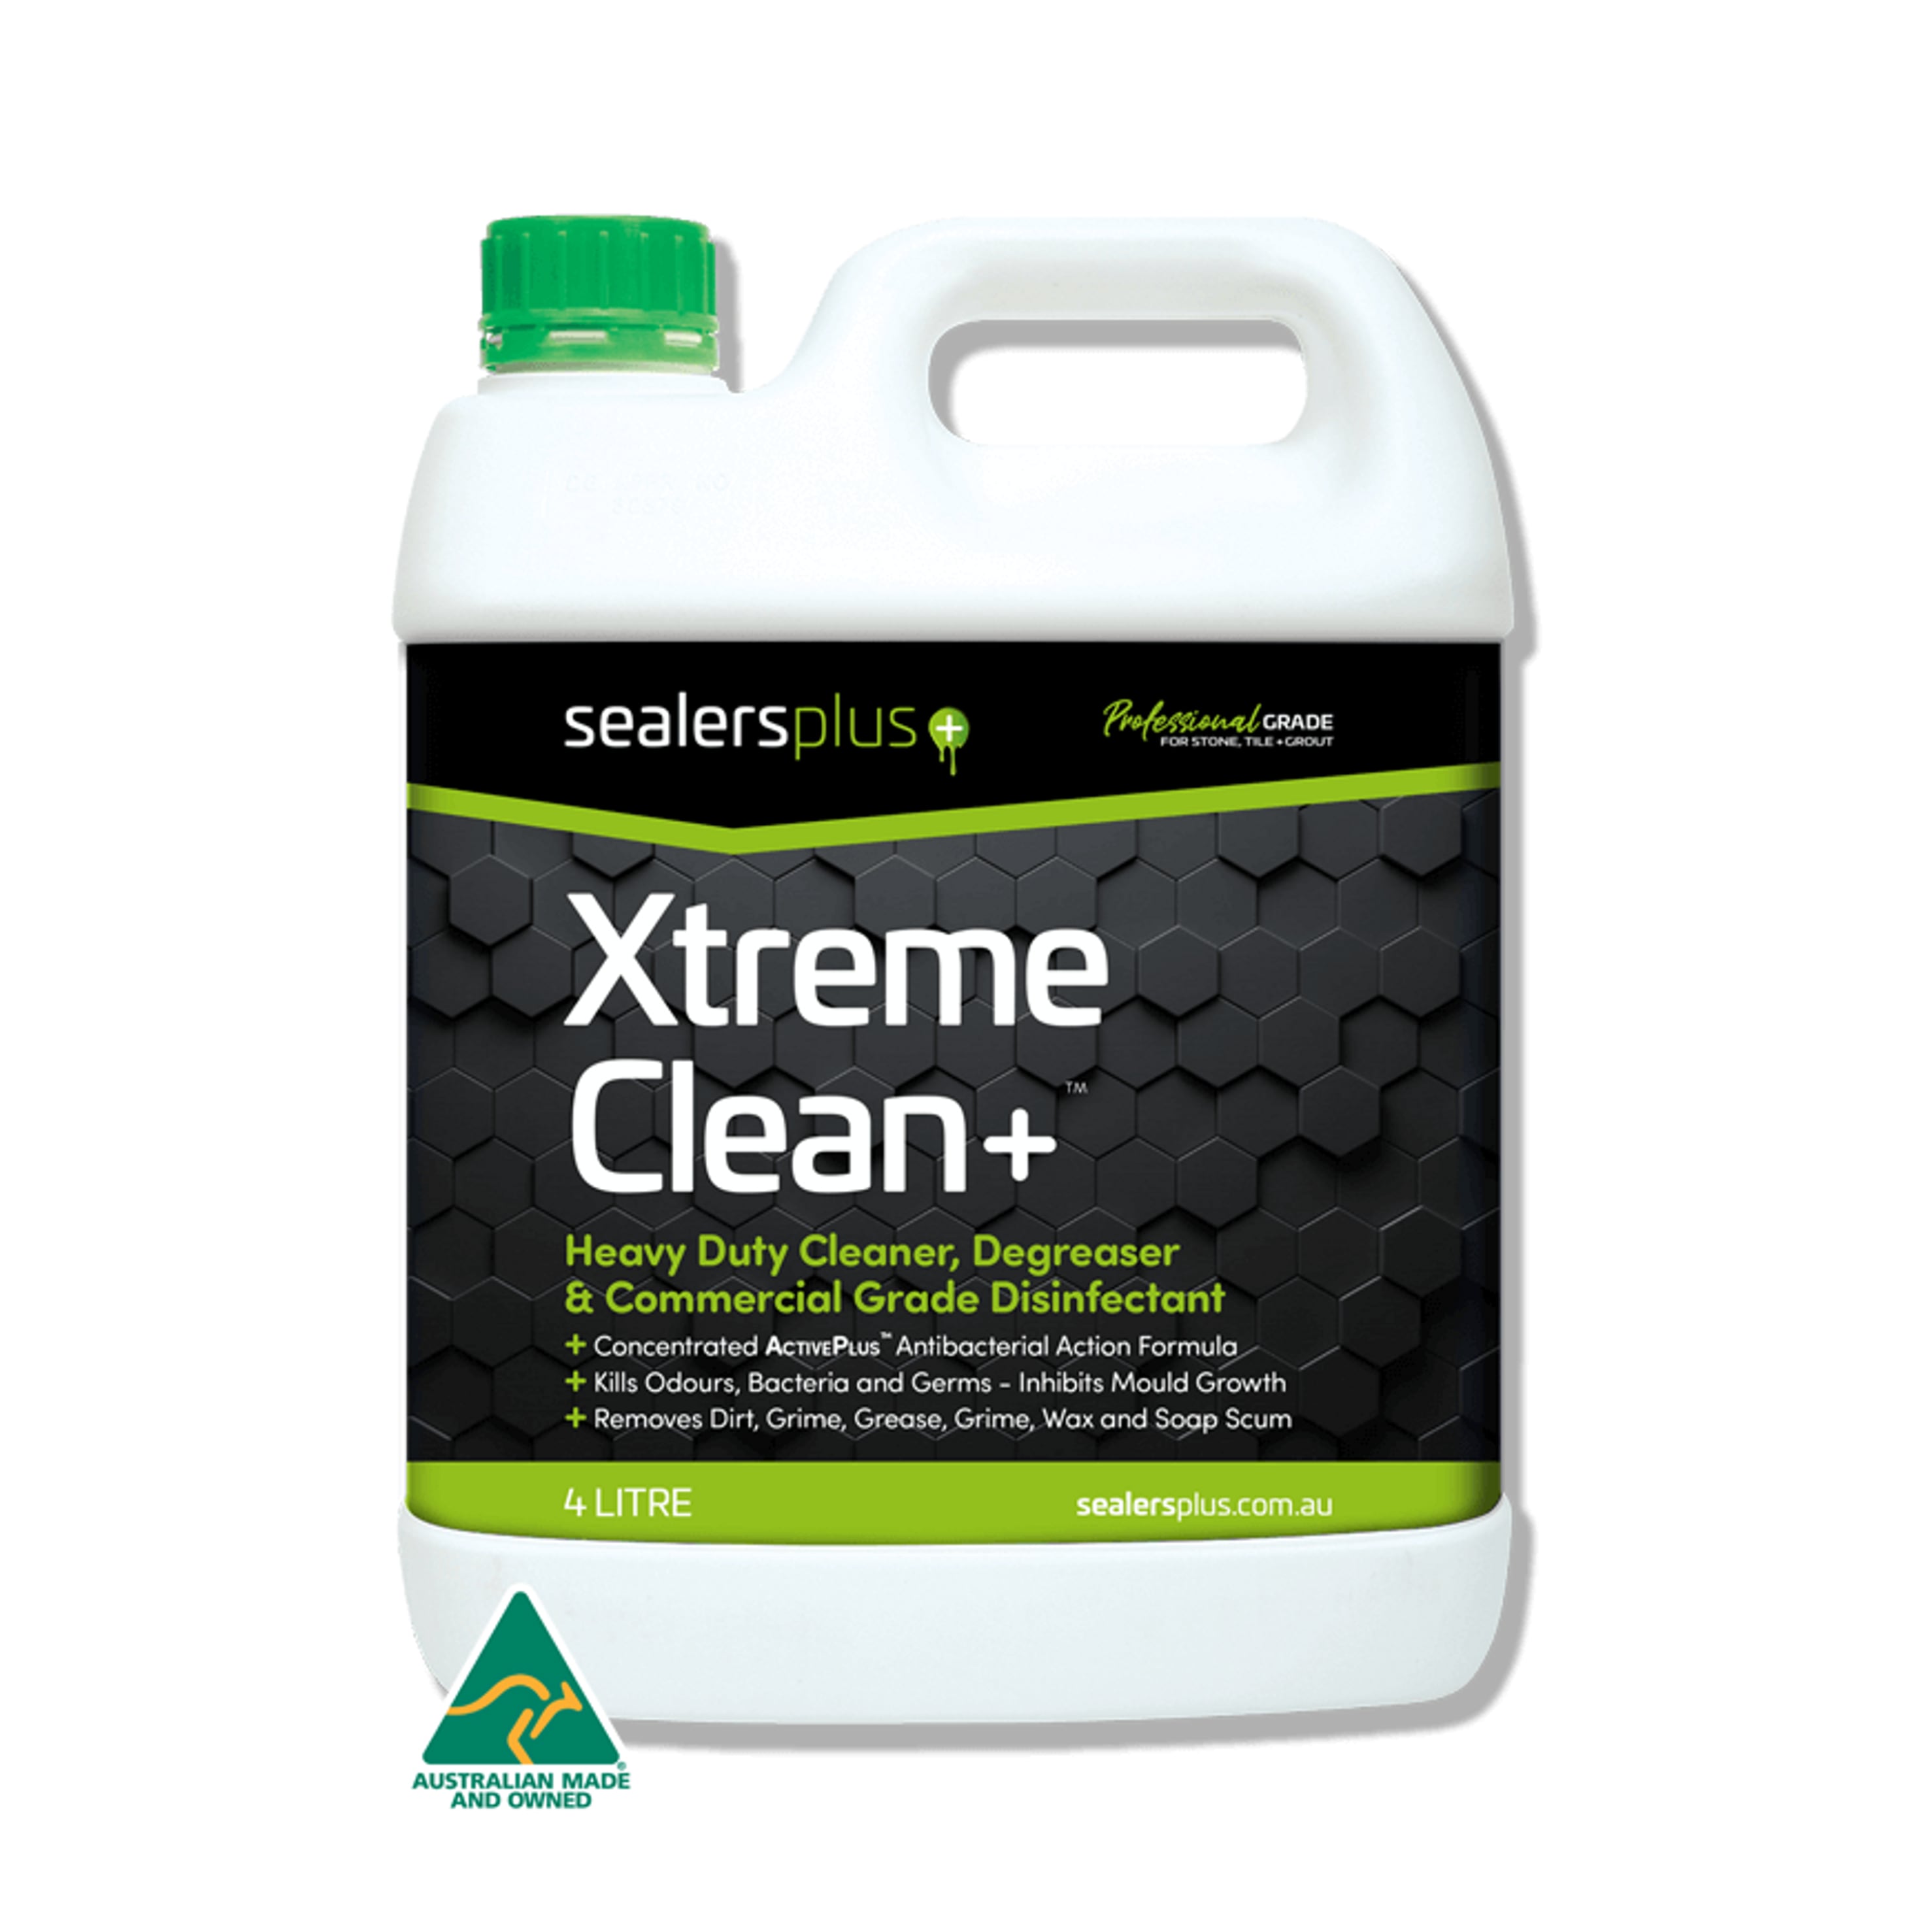 Xtremeclean+ – Professional Grade Heavy Duty Stone, Tile & Grout Cleaner Plus Commercial Grade Disinfectant Aqua Seal